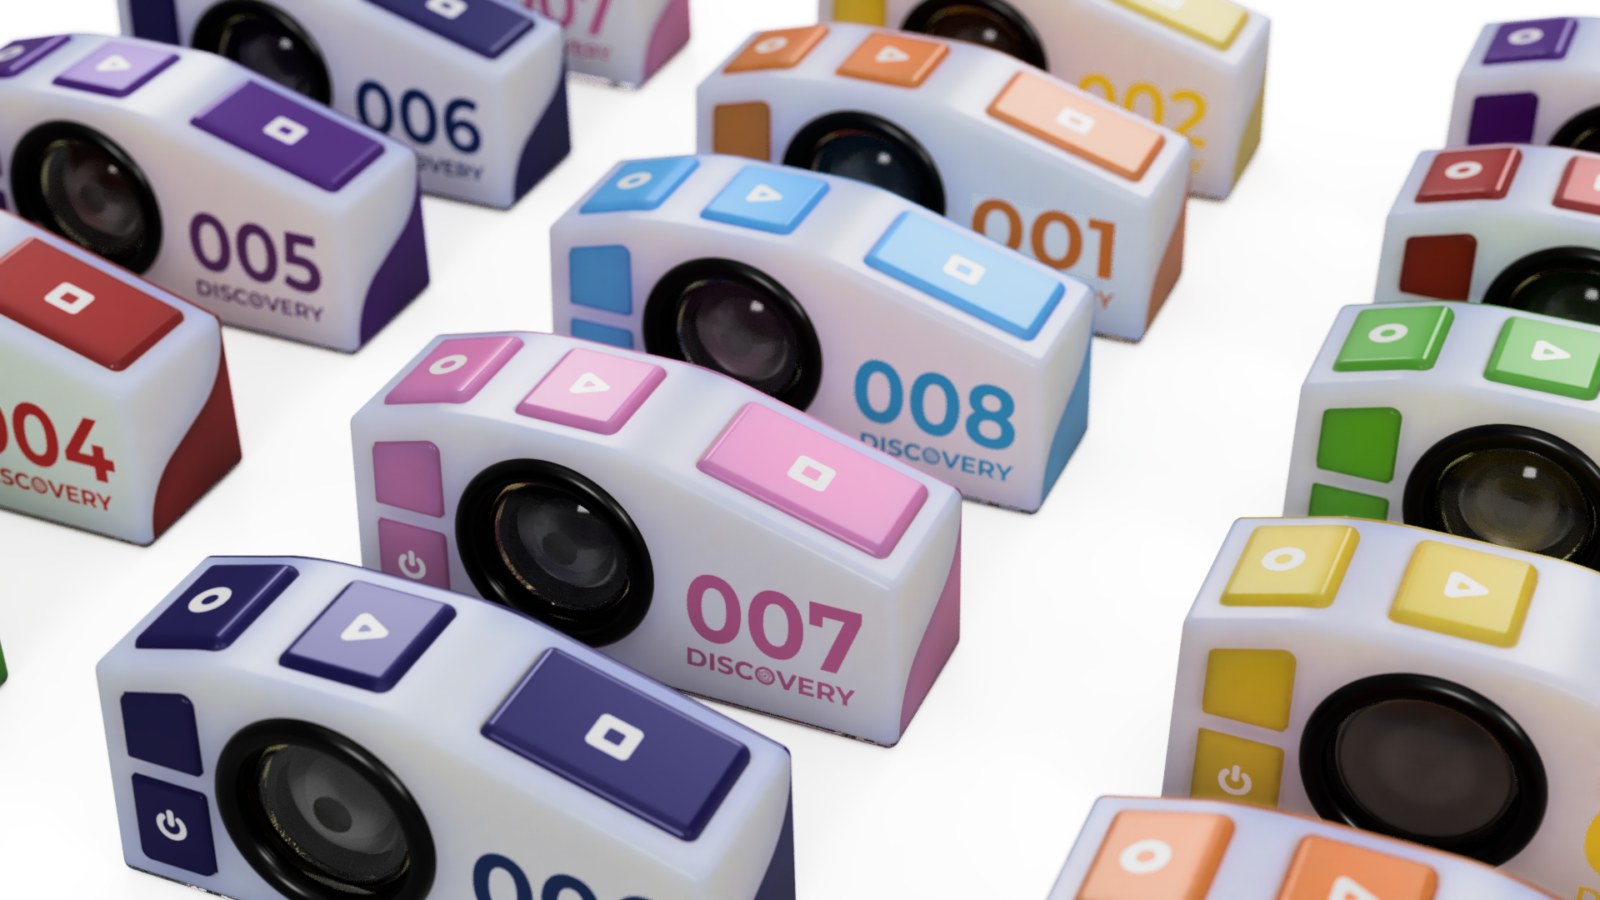 Shows a range of the cameras. Each a different colour and number ranging from 1-8